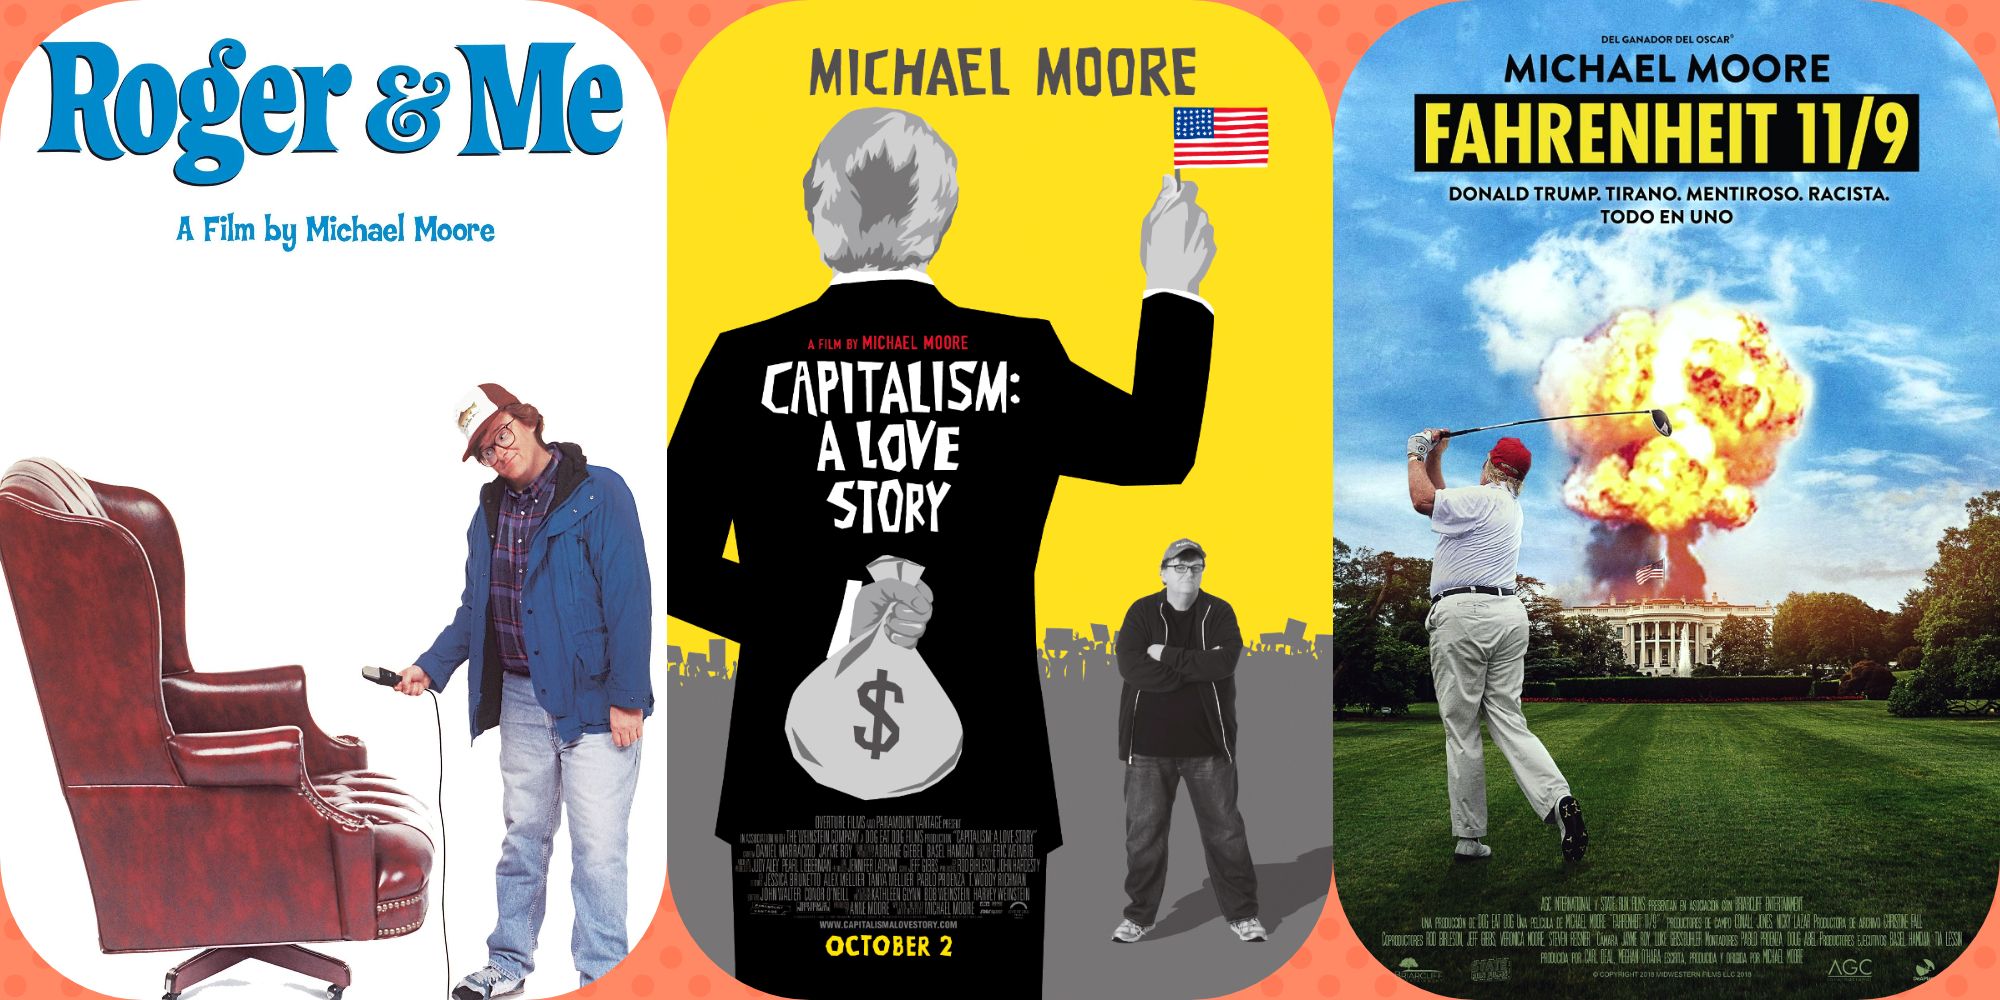 Michael Moore Documentary Posters, ROger & Me, Capitalism, Fahrenheit 11/9